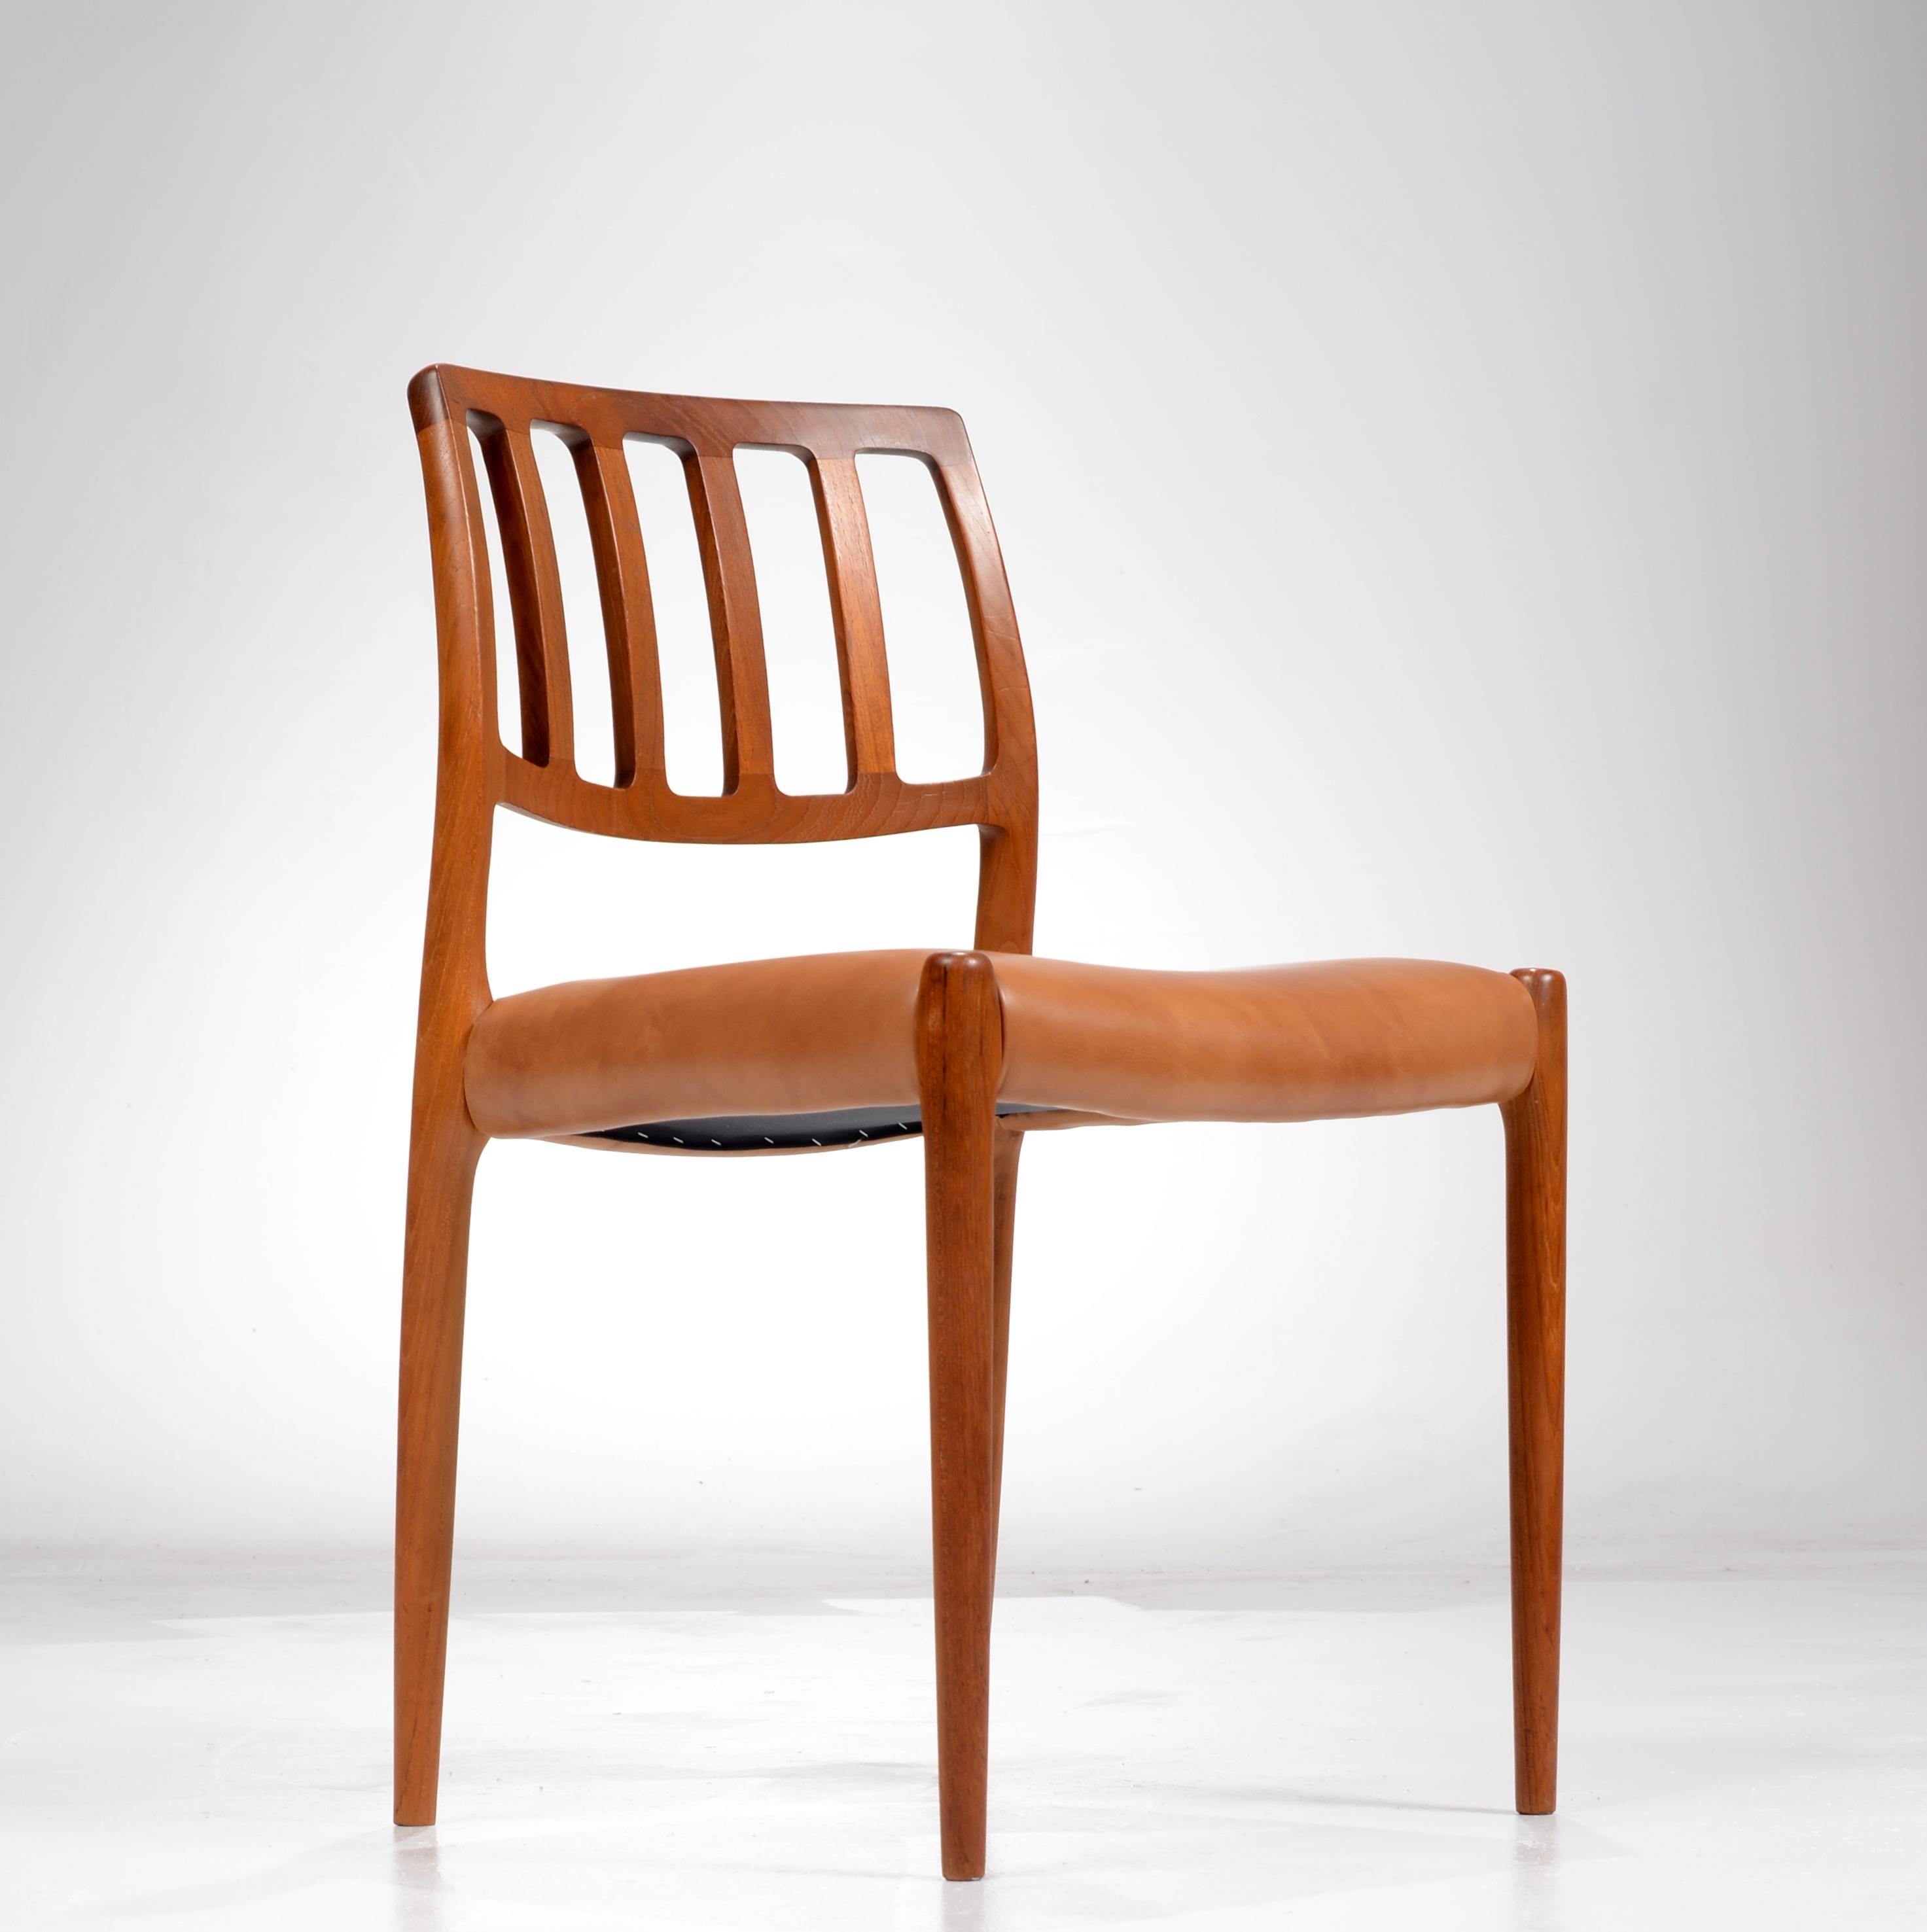 Set of six dining chairs designed by Niels O. Møller for J.L Møller Møbelfabrik in Denmark model 83, in teak and leather.
Newly upholstered and restored, all chairs marked.  